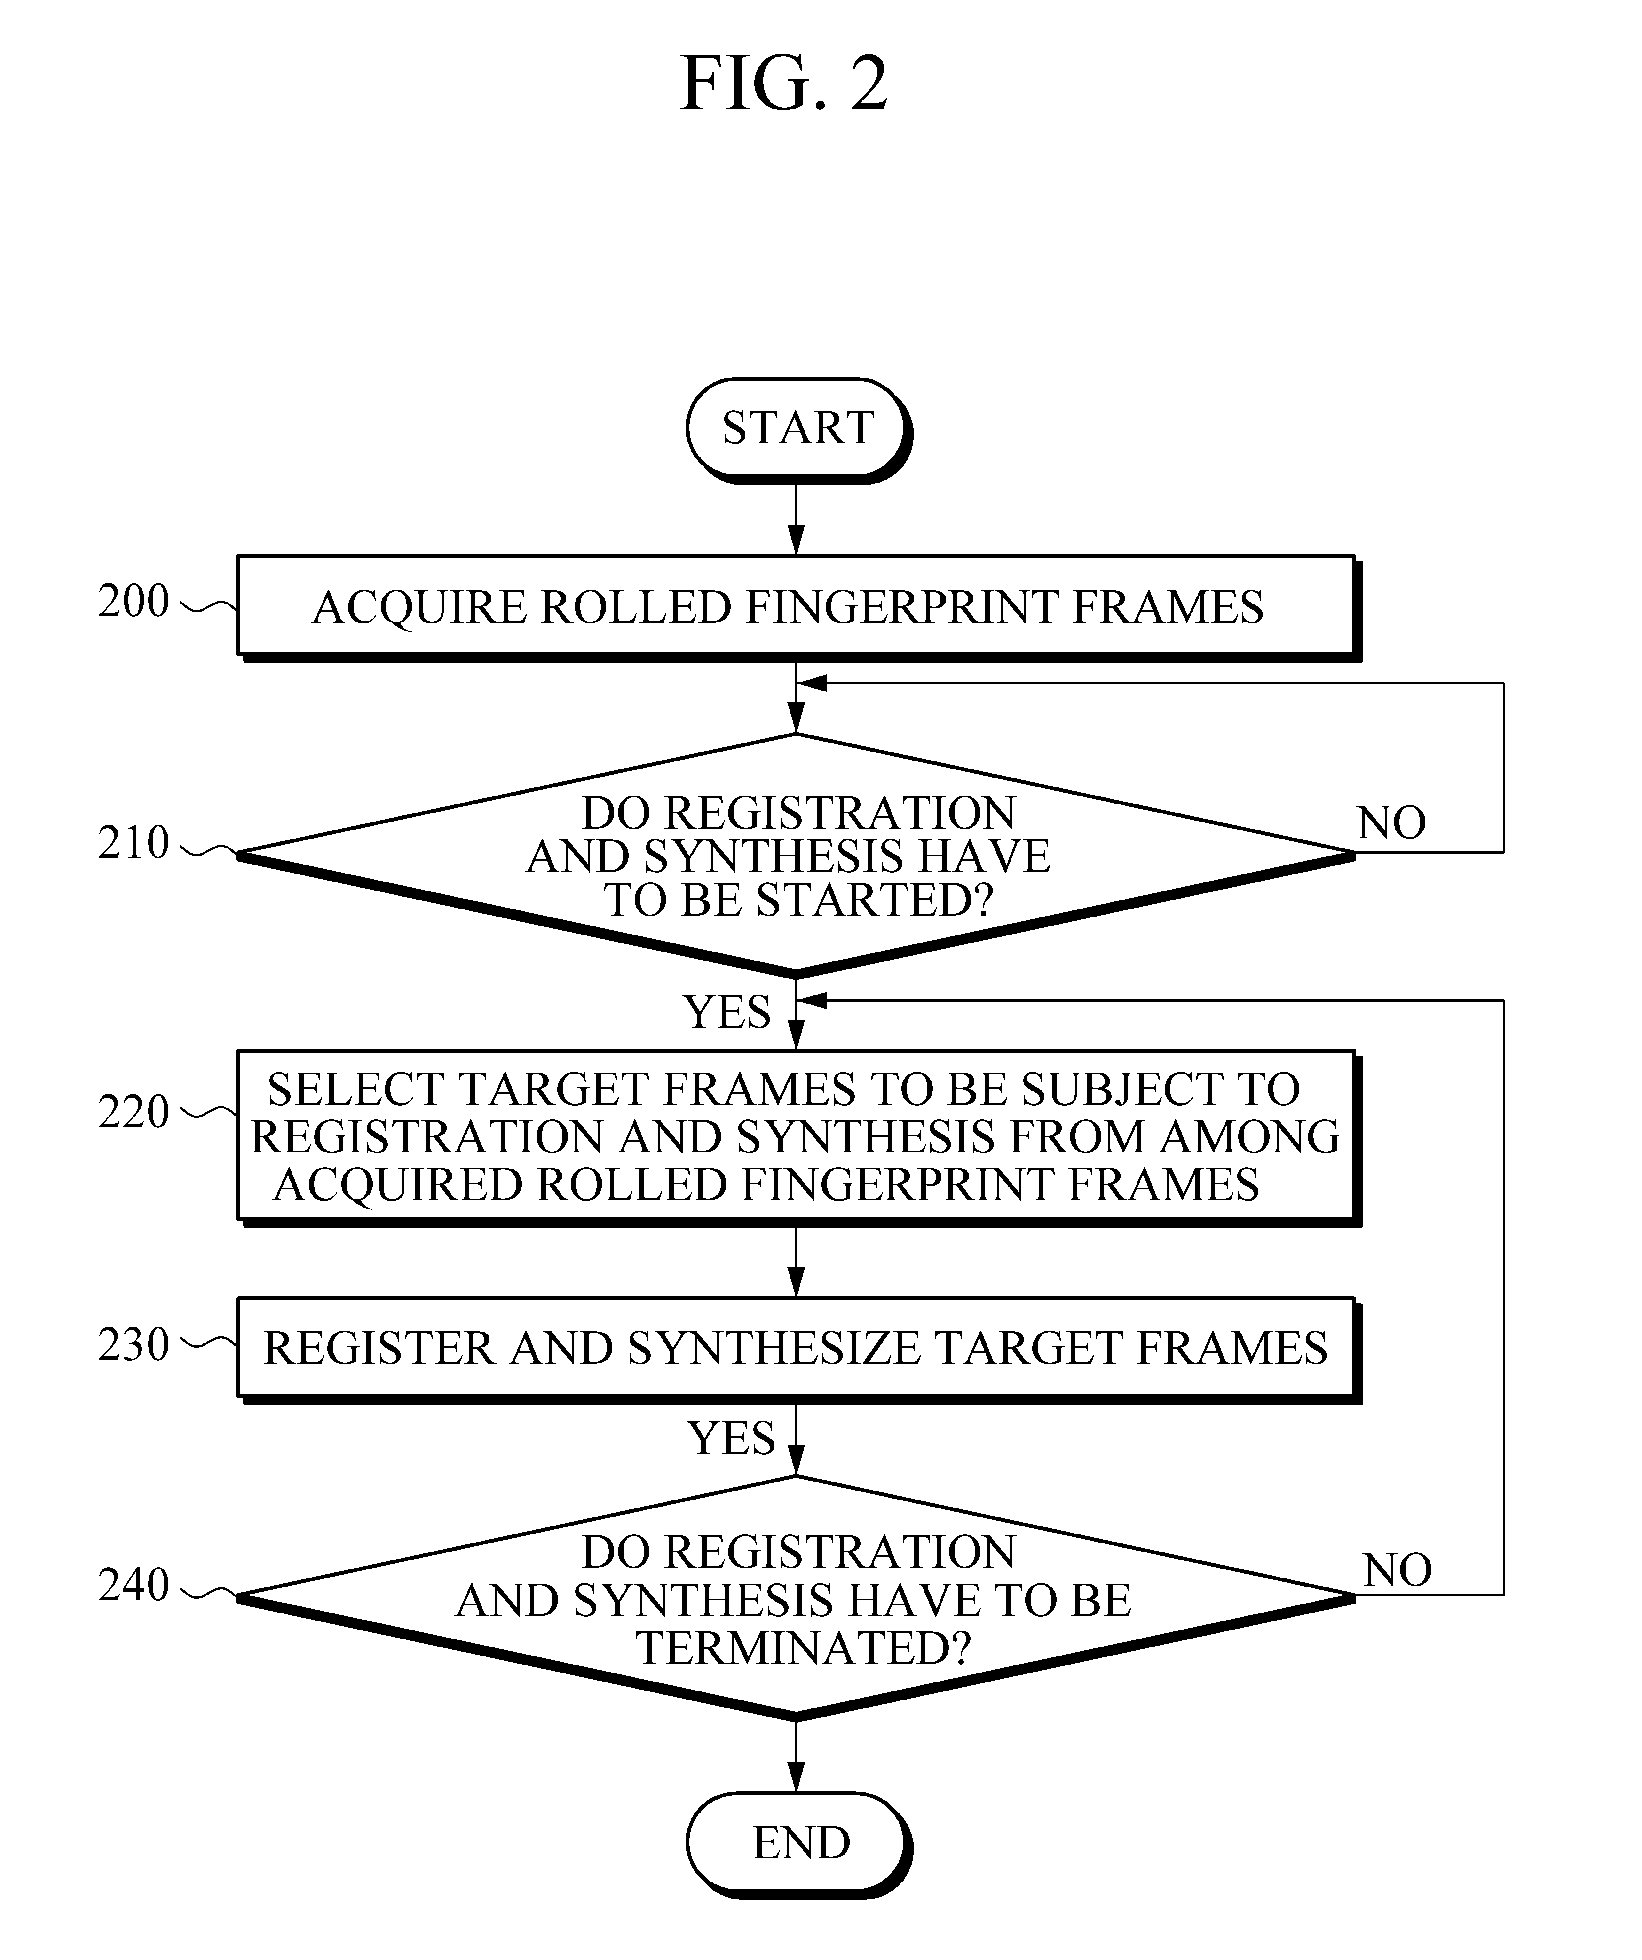 Rolled fingerprint acquisition apparatus and method for automatically detecting start and end of registration and synthesis